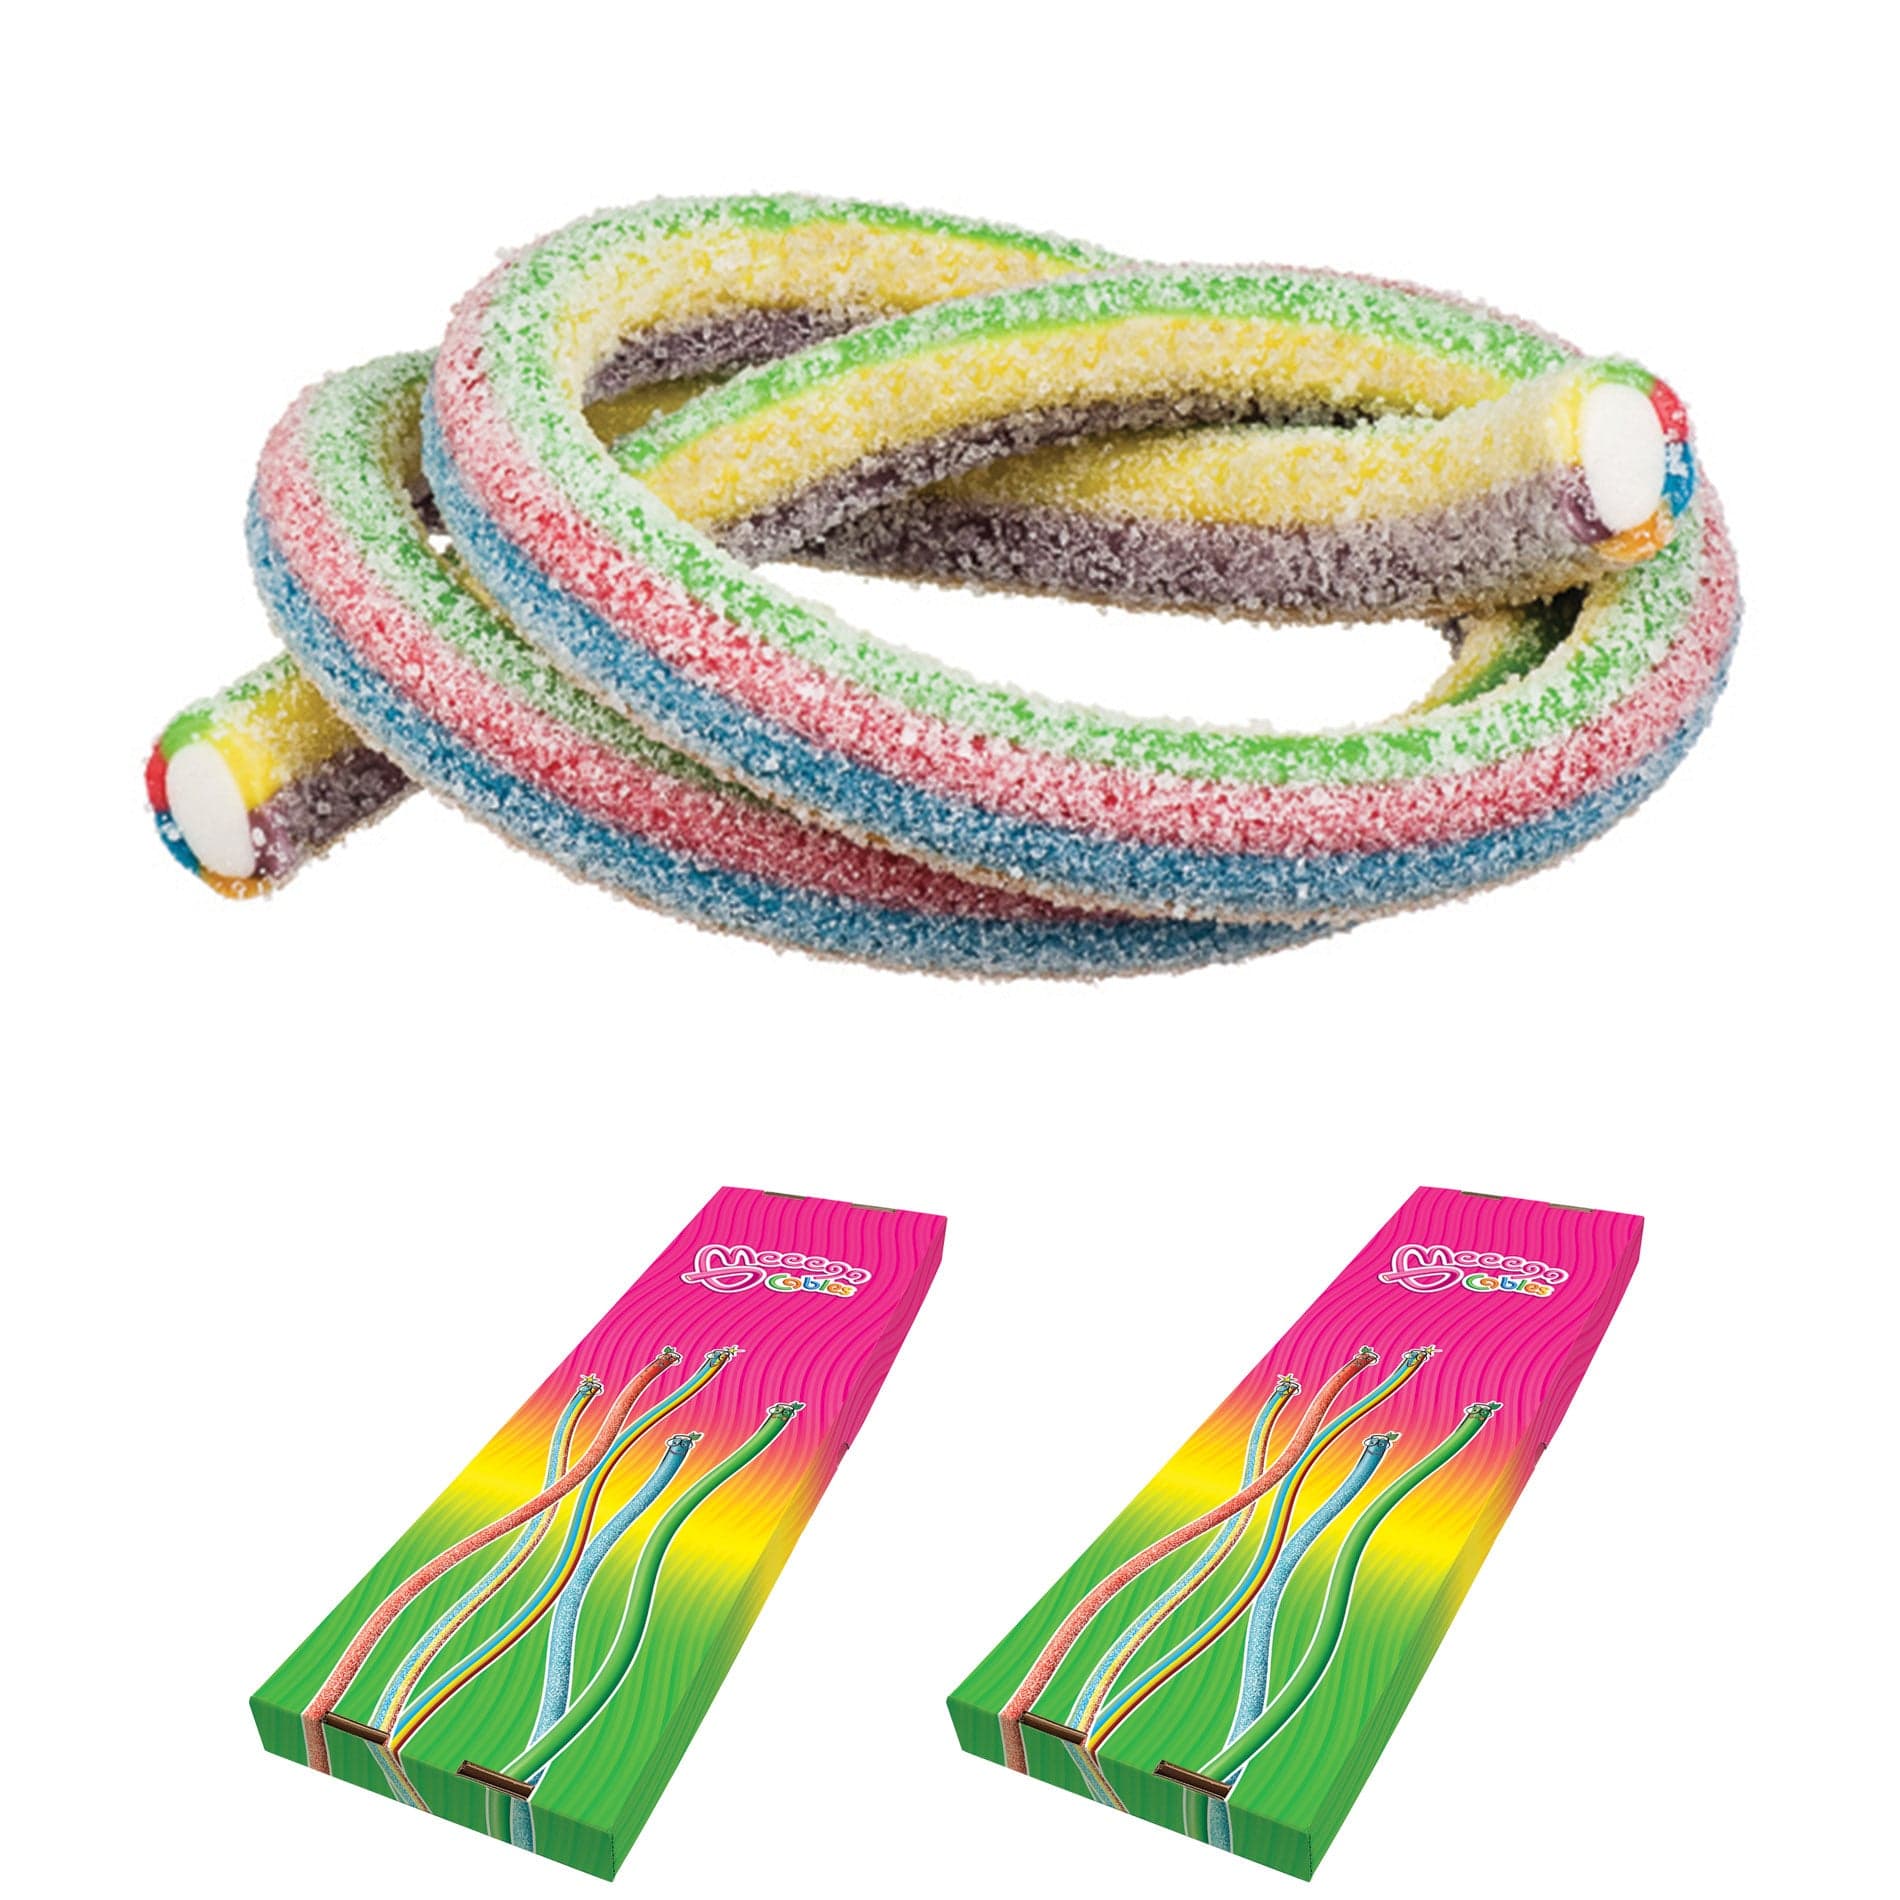 Novelty Concessions Gummy Rope SOUR SUNSHINE FRUIT / 2 Pack (60 pieces) Meeega Cables European Chewy Rope Candy - Box of 30 individually wrapped Meeega Cables, each over 2-feet long cups with lids and straws